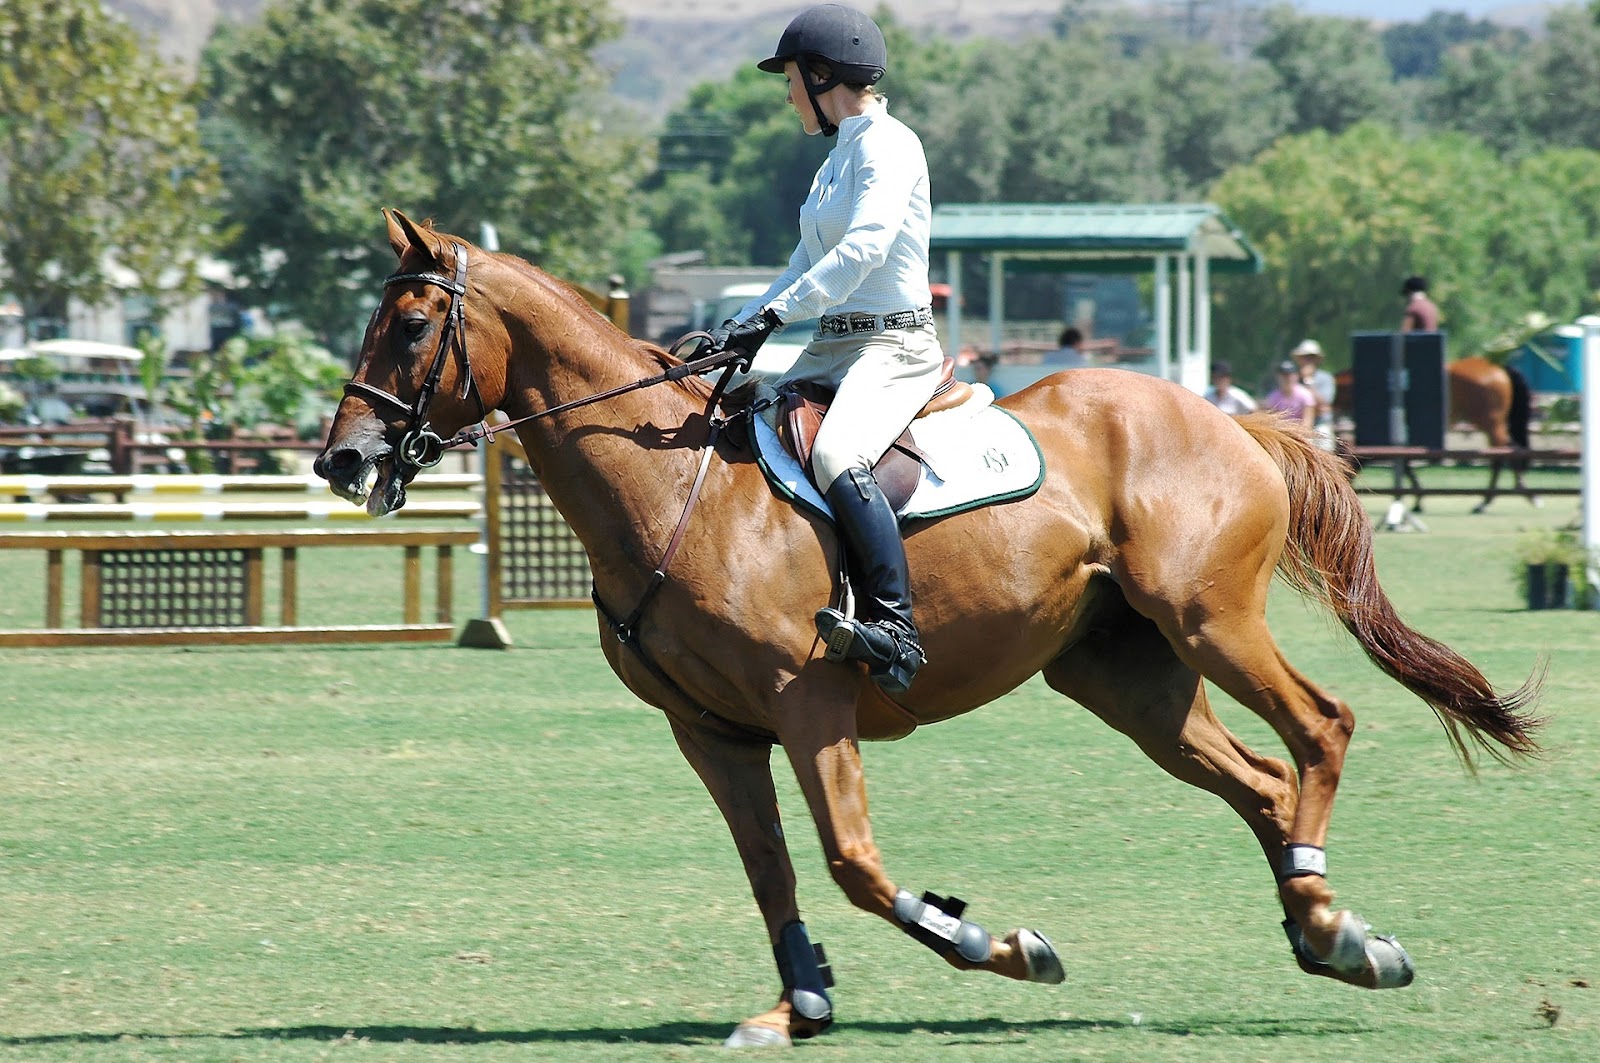 Rider on a chestnut horse gallops a jumping course